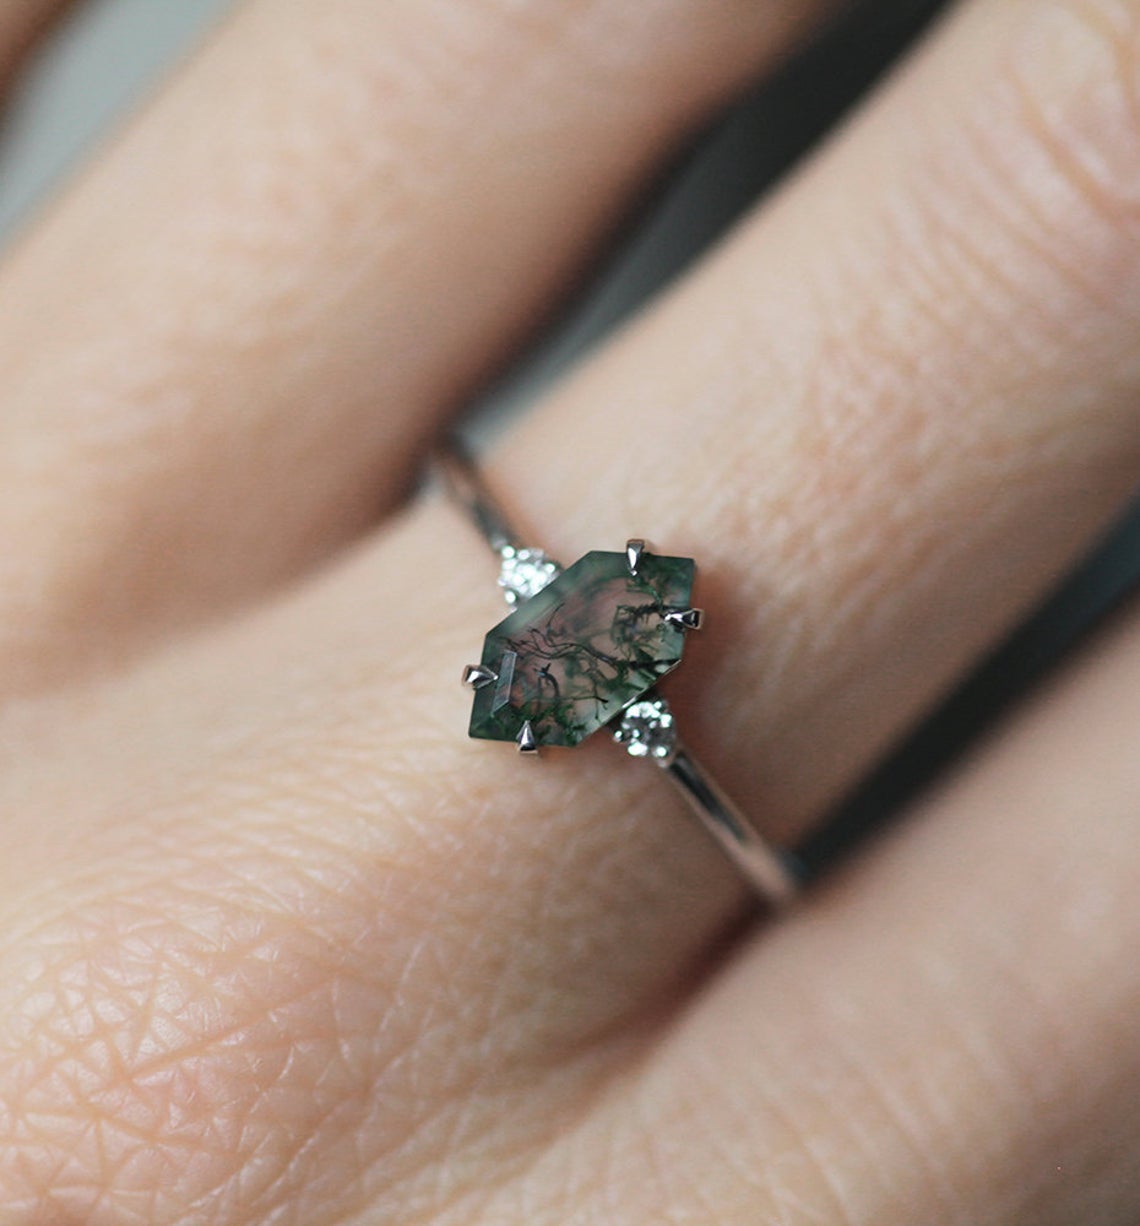 Hexagon Moss Agate Ring Set with 2 Side White Diamonds and V-Shaped Band